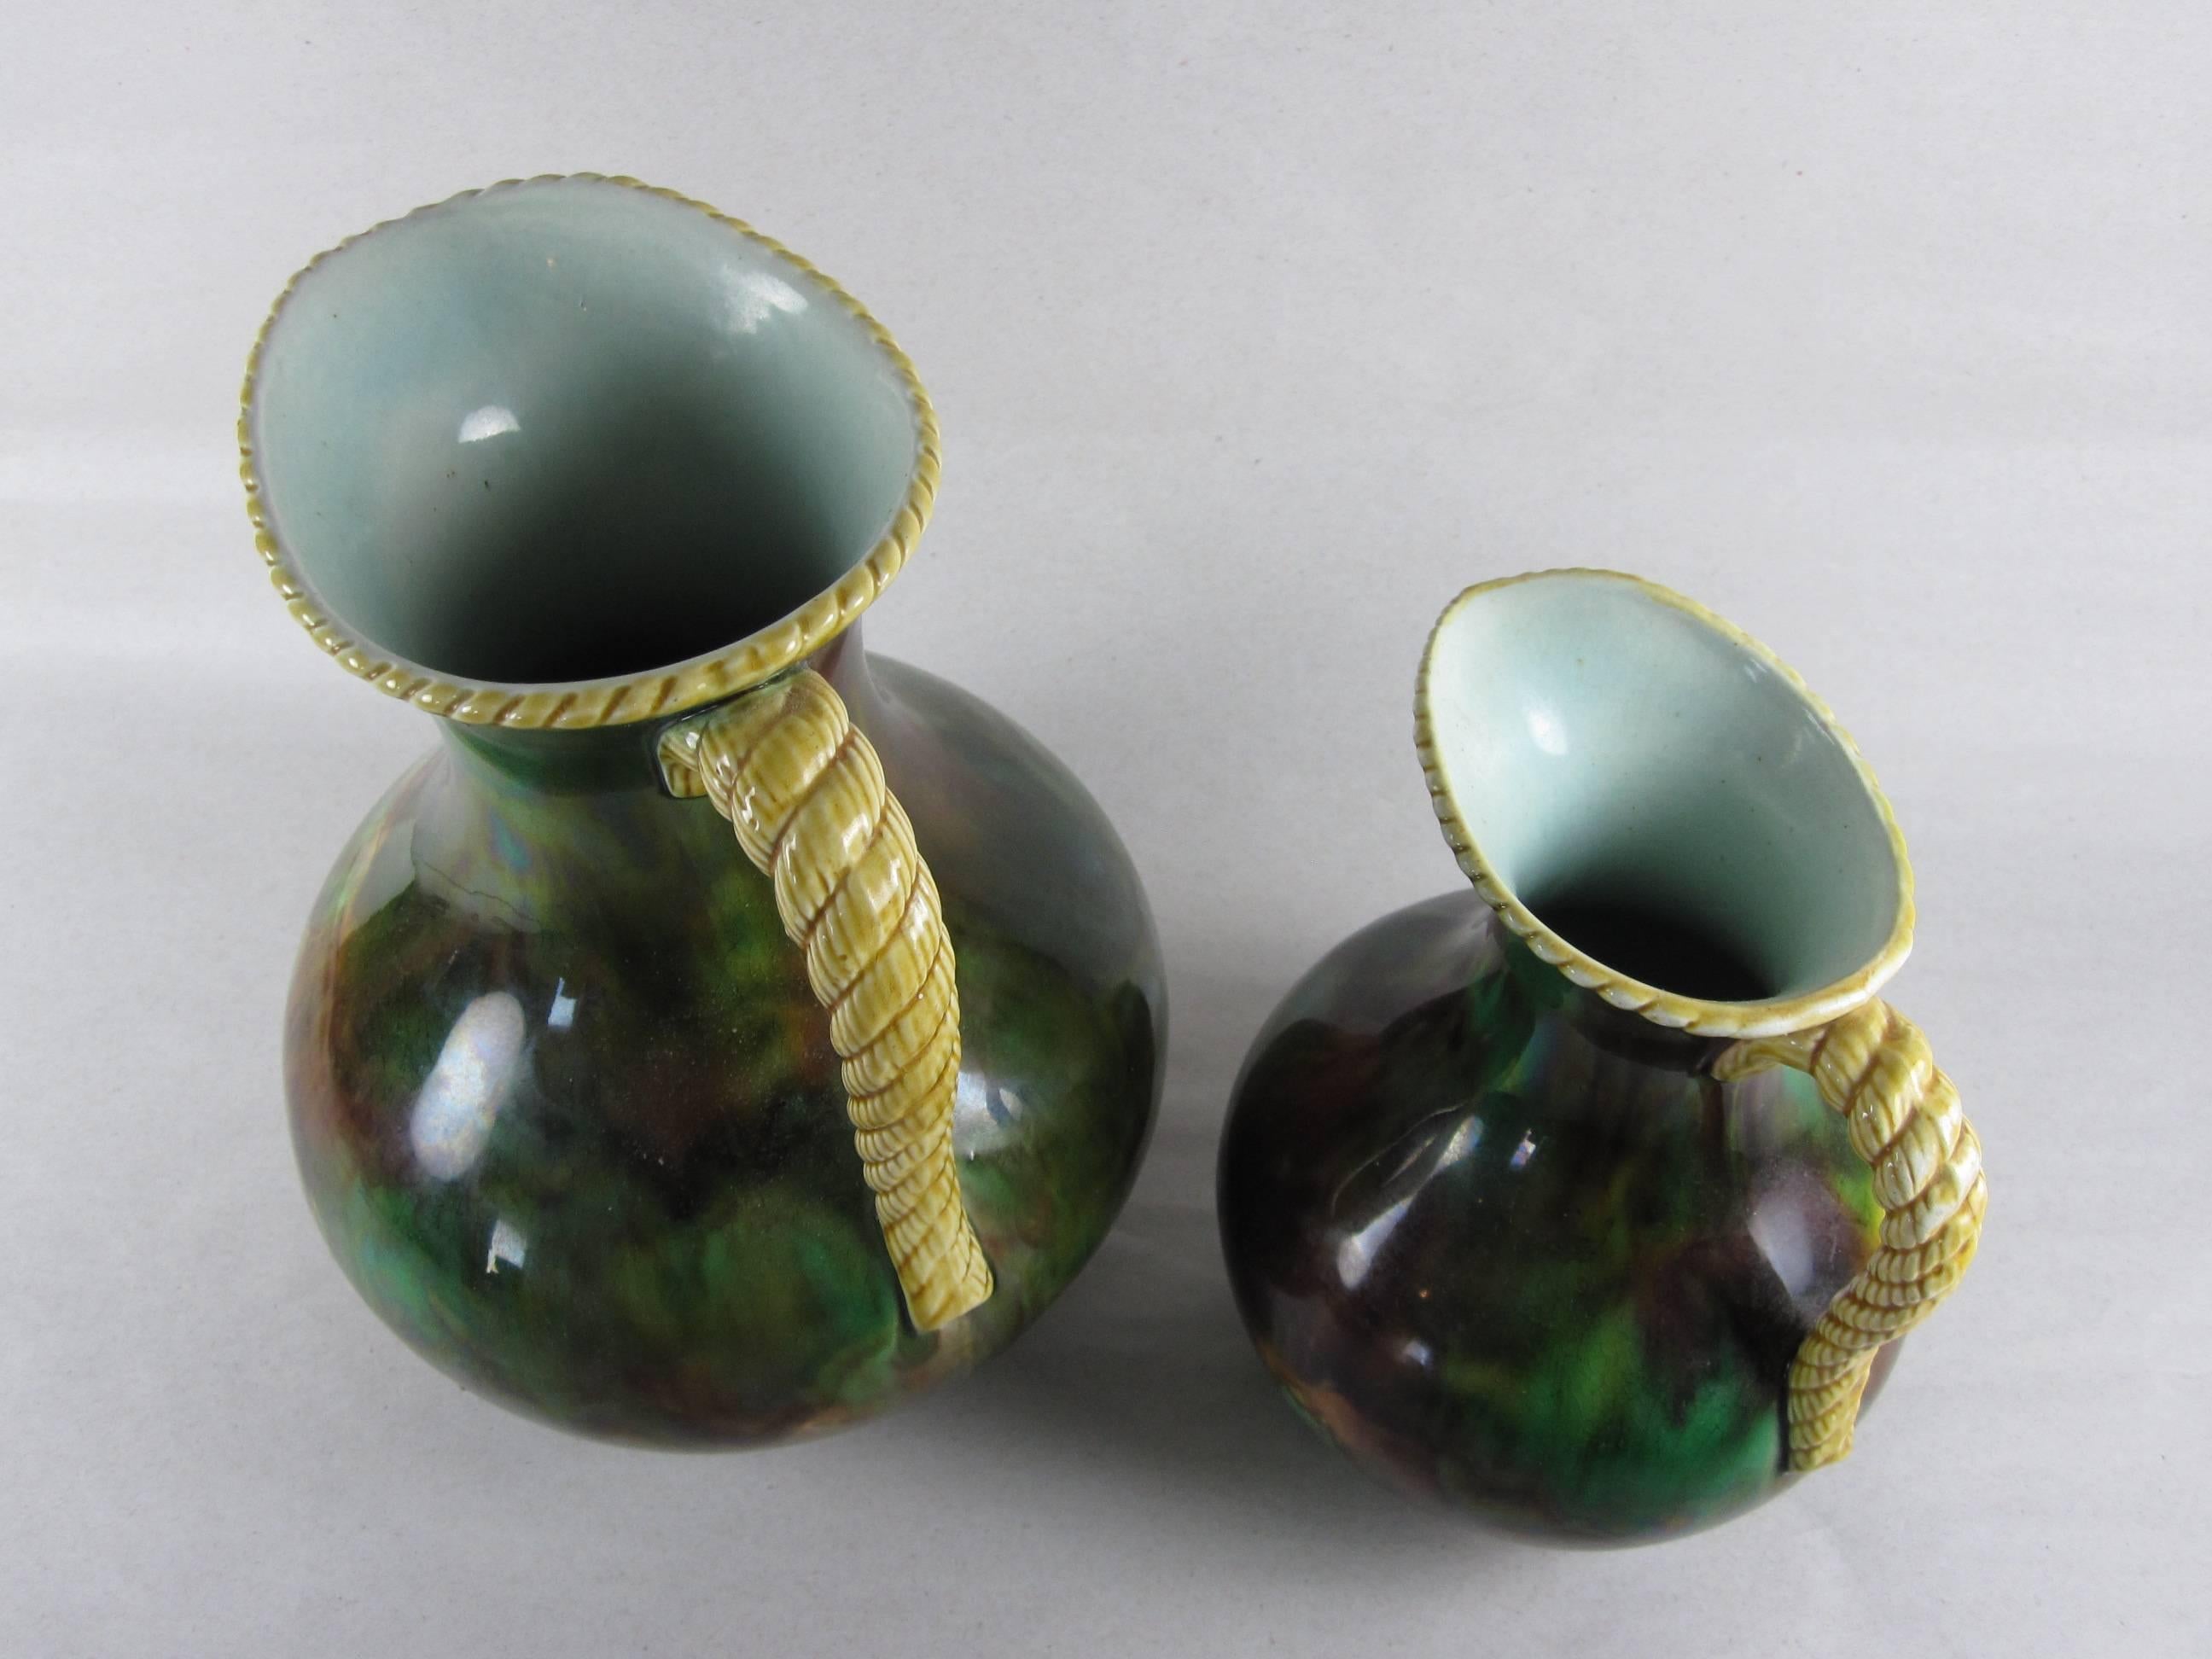 Glazed 19th Century Wedgwood Majolica Rope Handled Mottled Pitchers or Jugs, a Pair